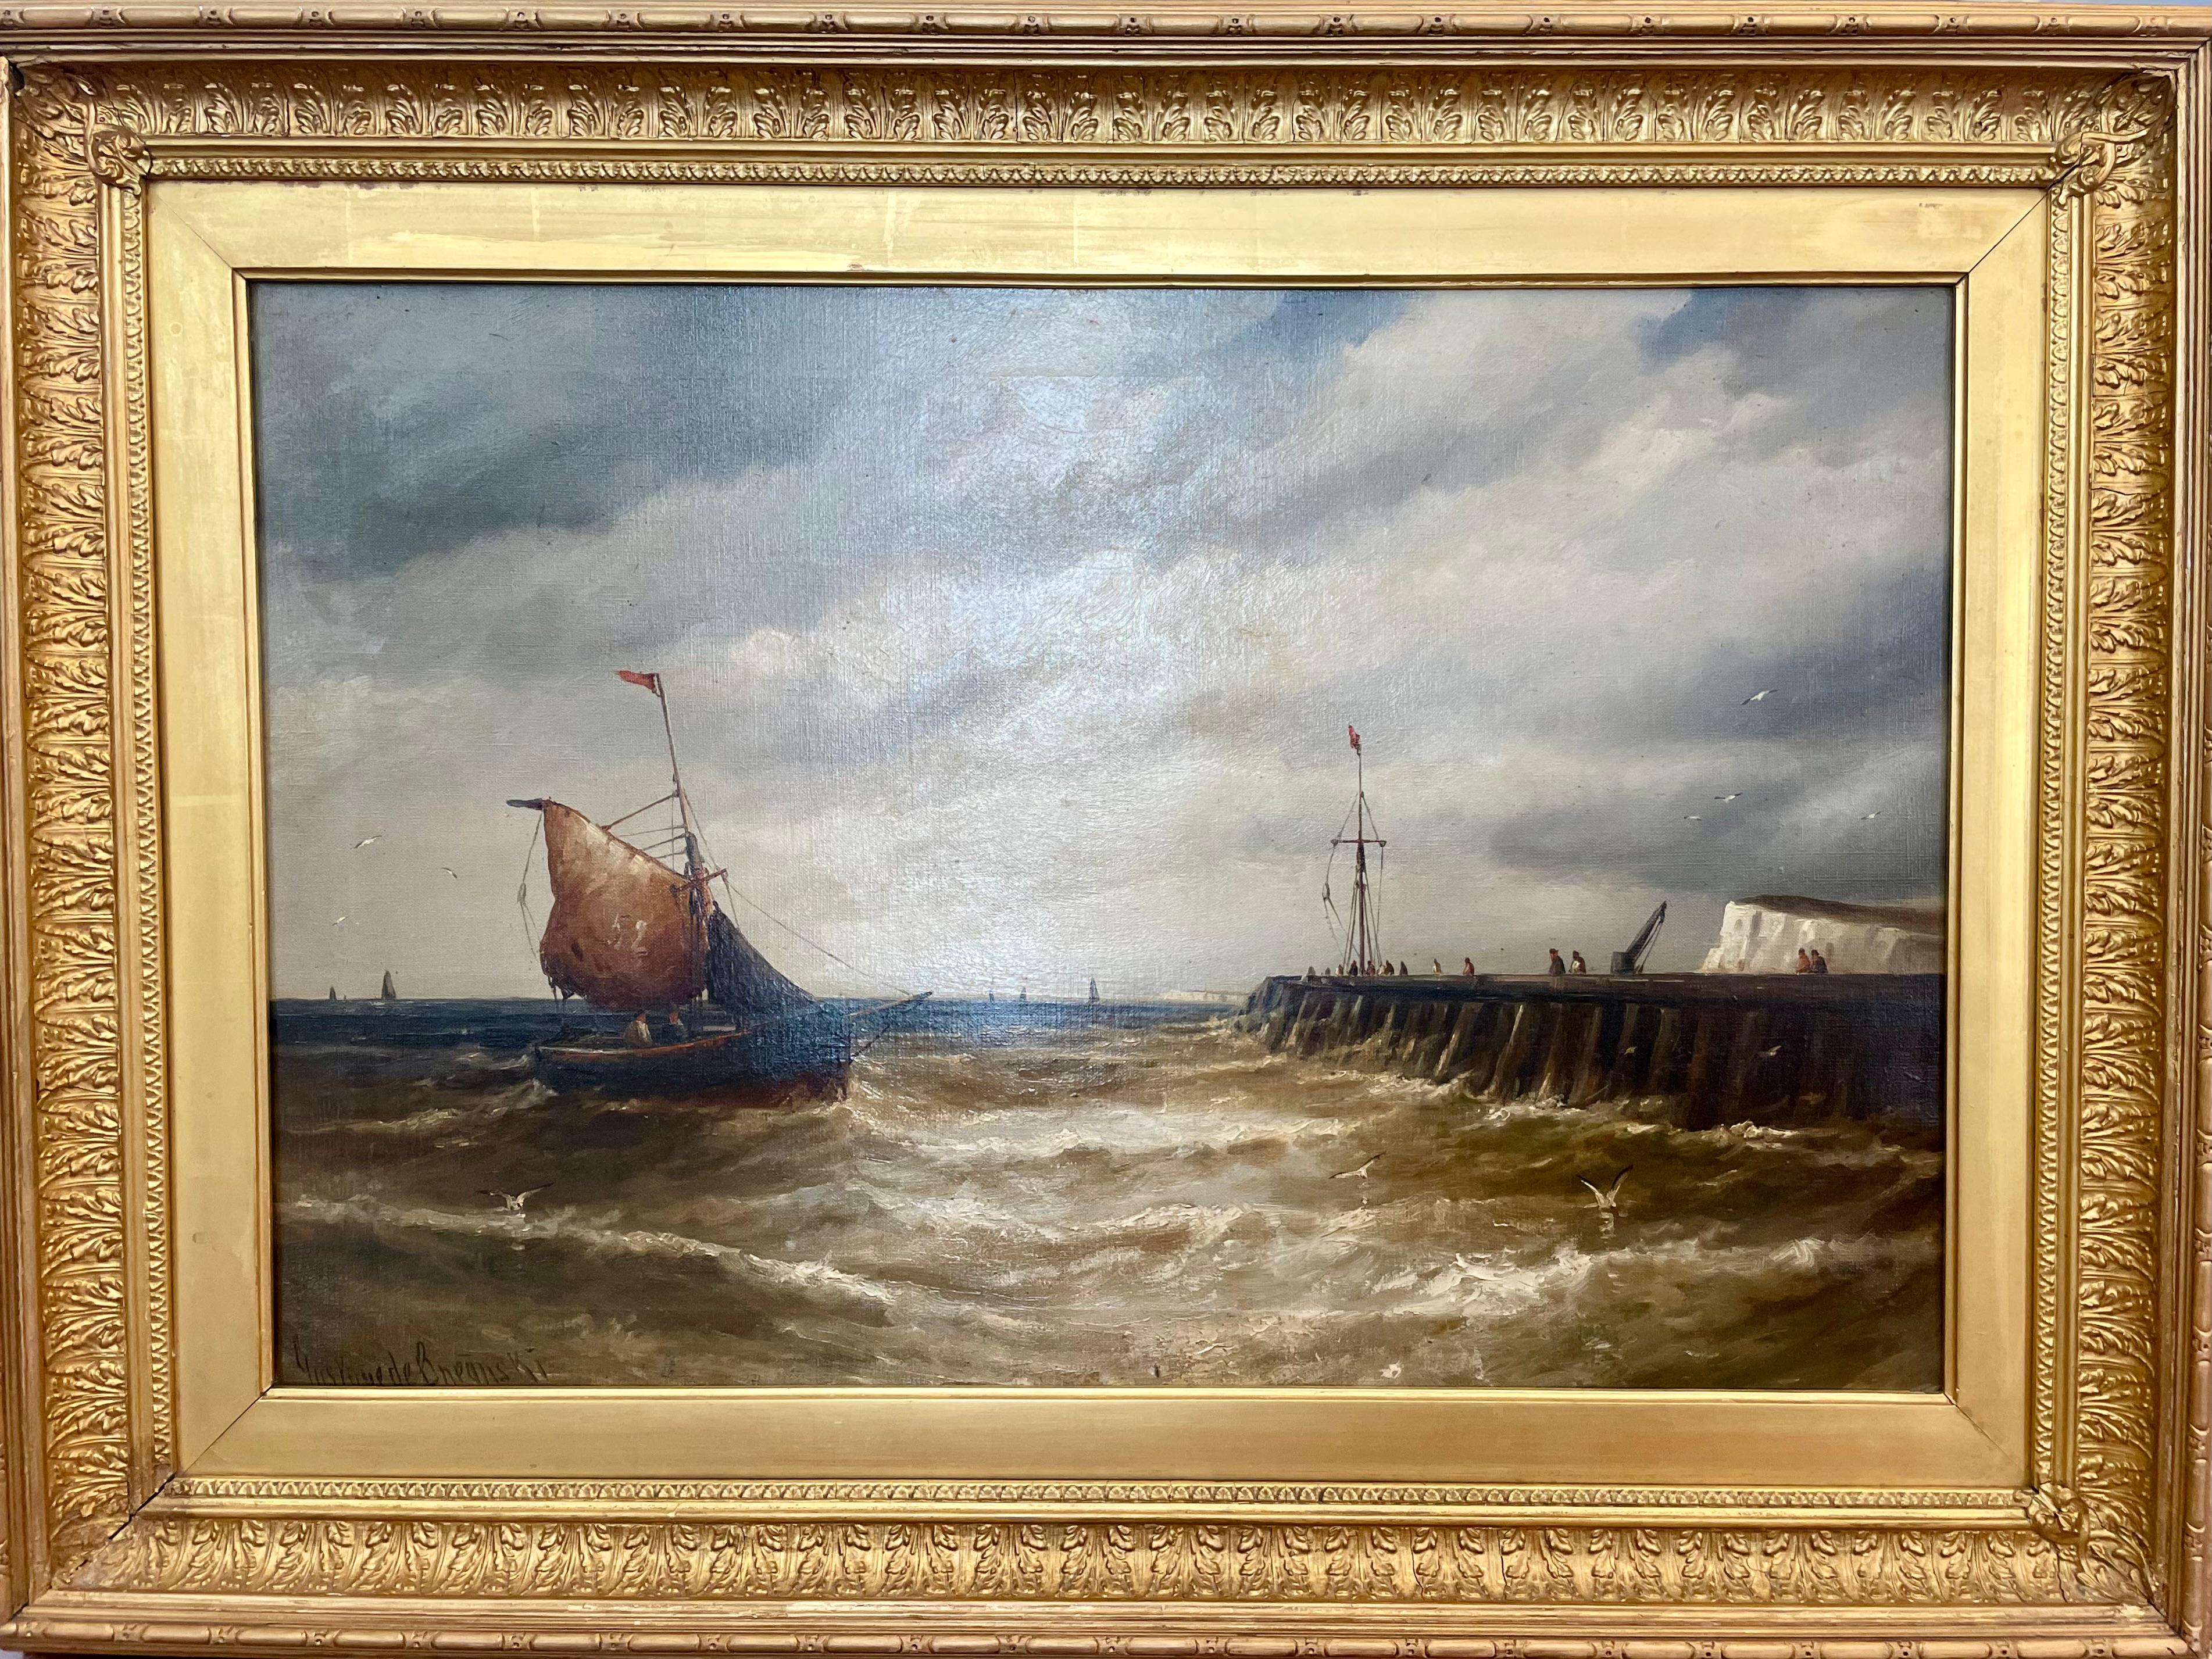 Coming Into the Harbor, White Cliffs 19th century